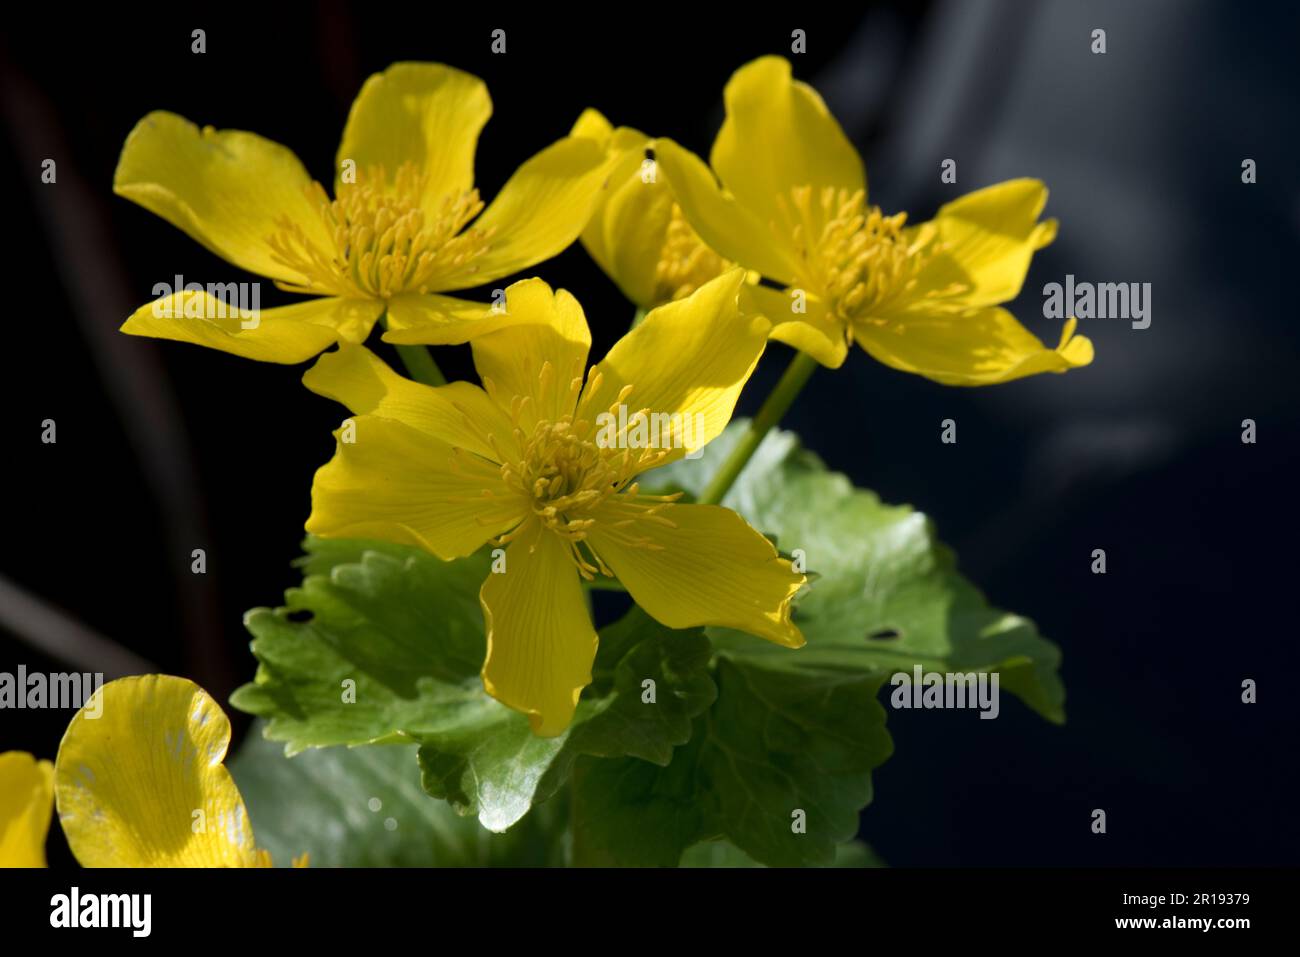 Yellow flowers of marsh-marigold or kingcup (Caltha palustris) with green leaves set against a dark background, Berkshire, April Stock Photo